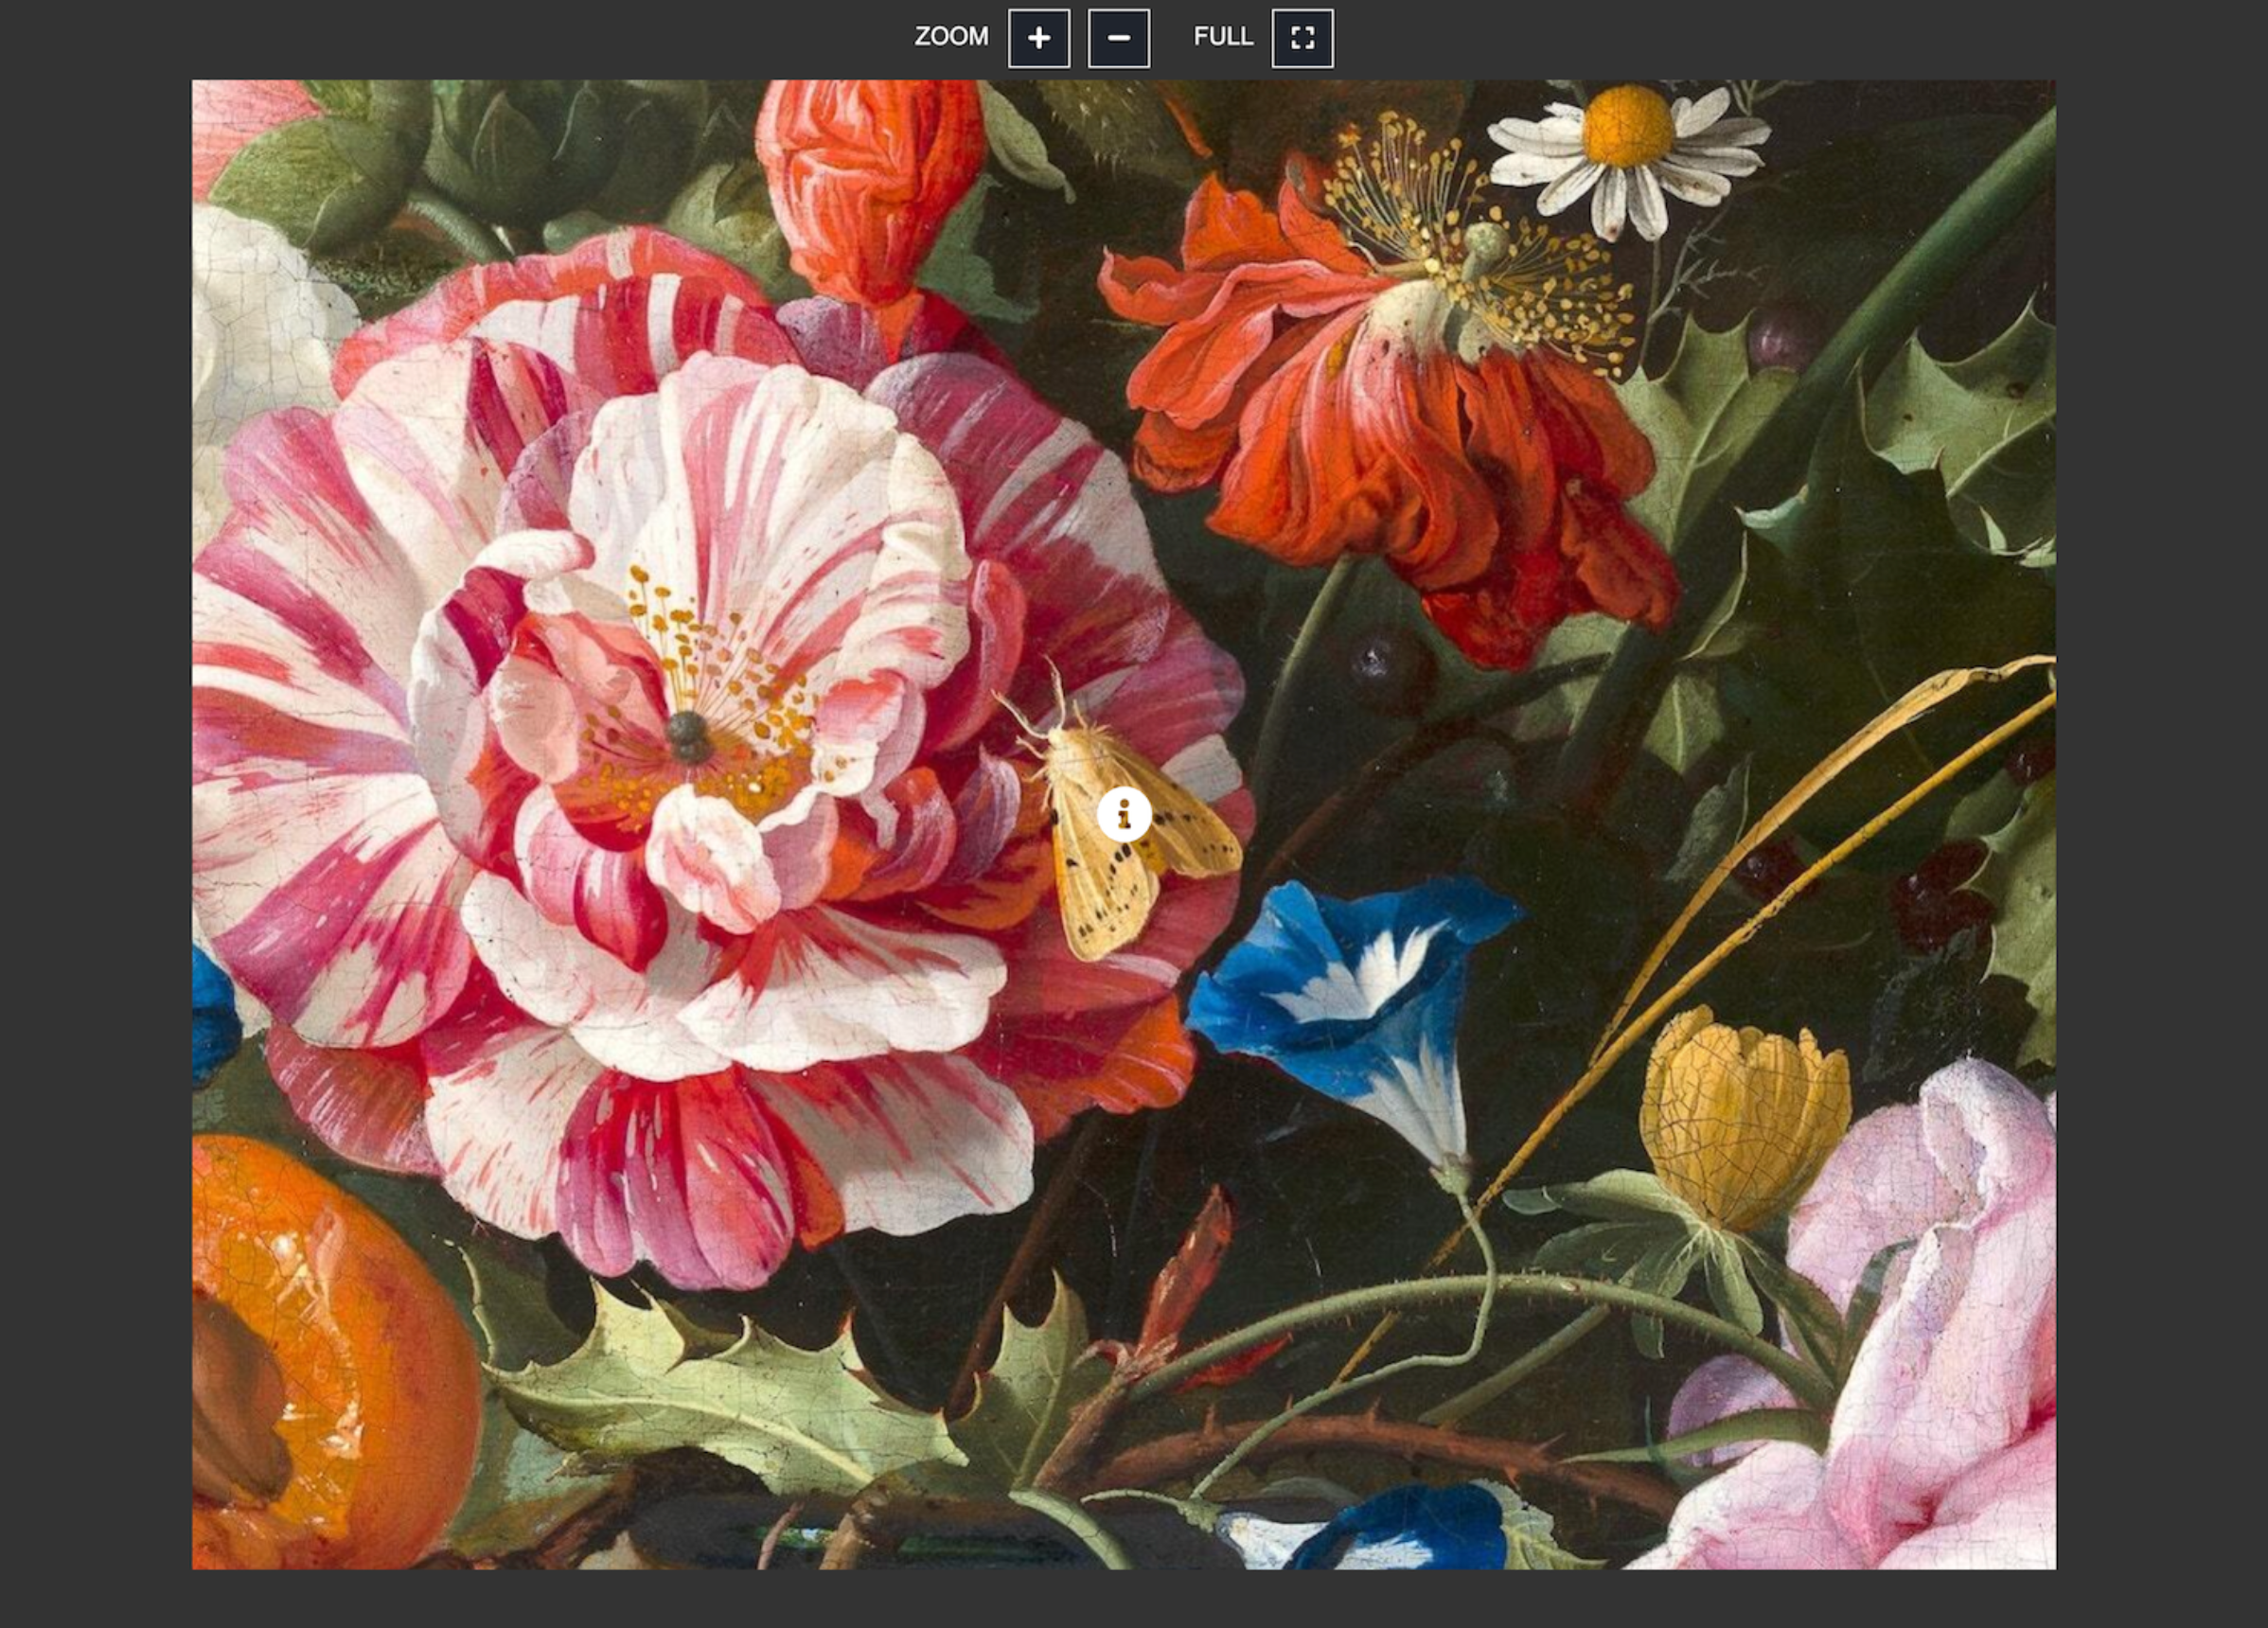 painting of a vase with flowers and fruits zoomed very far into the center to show added detail in a large image